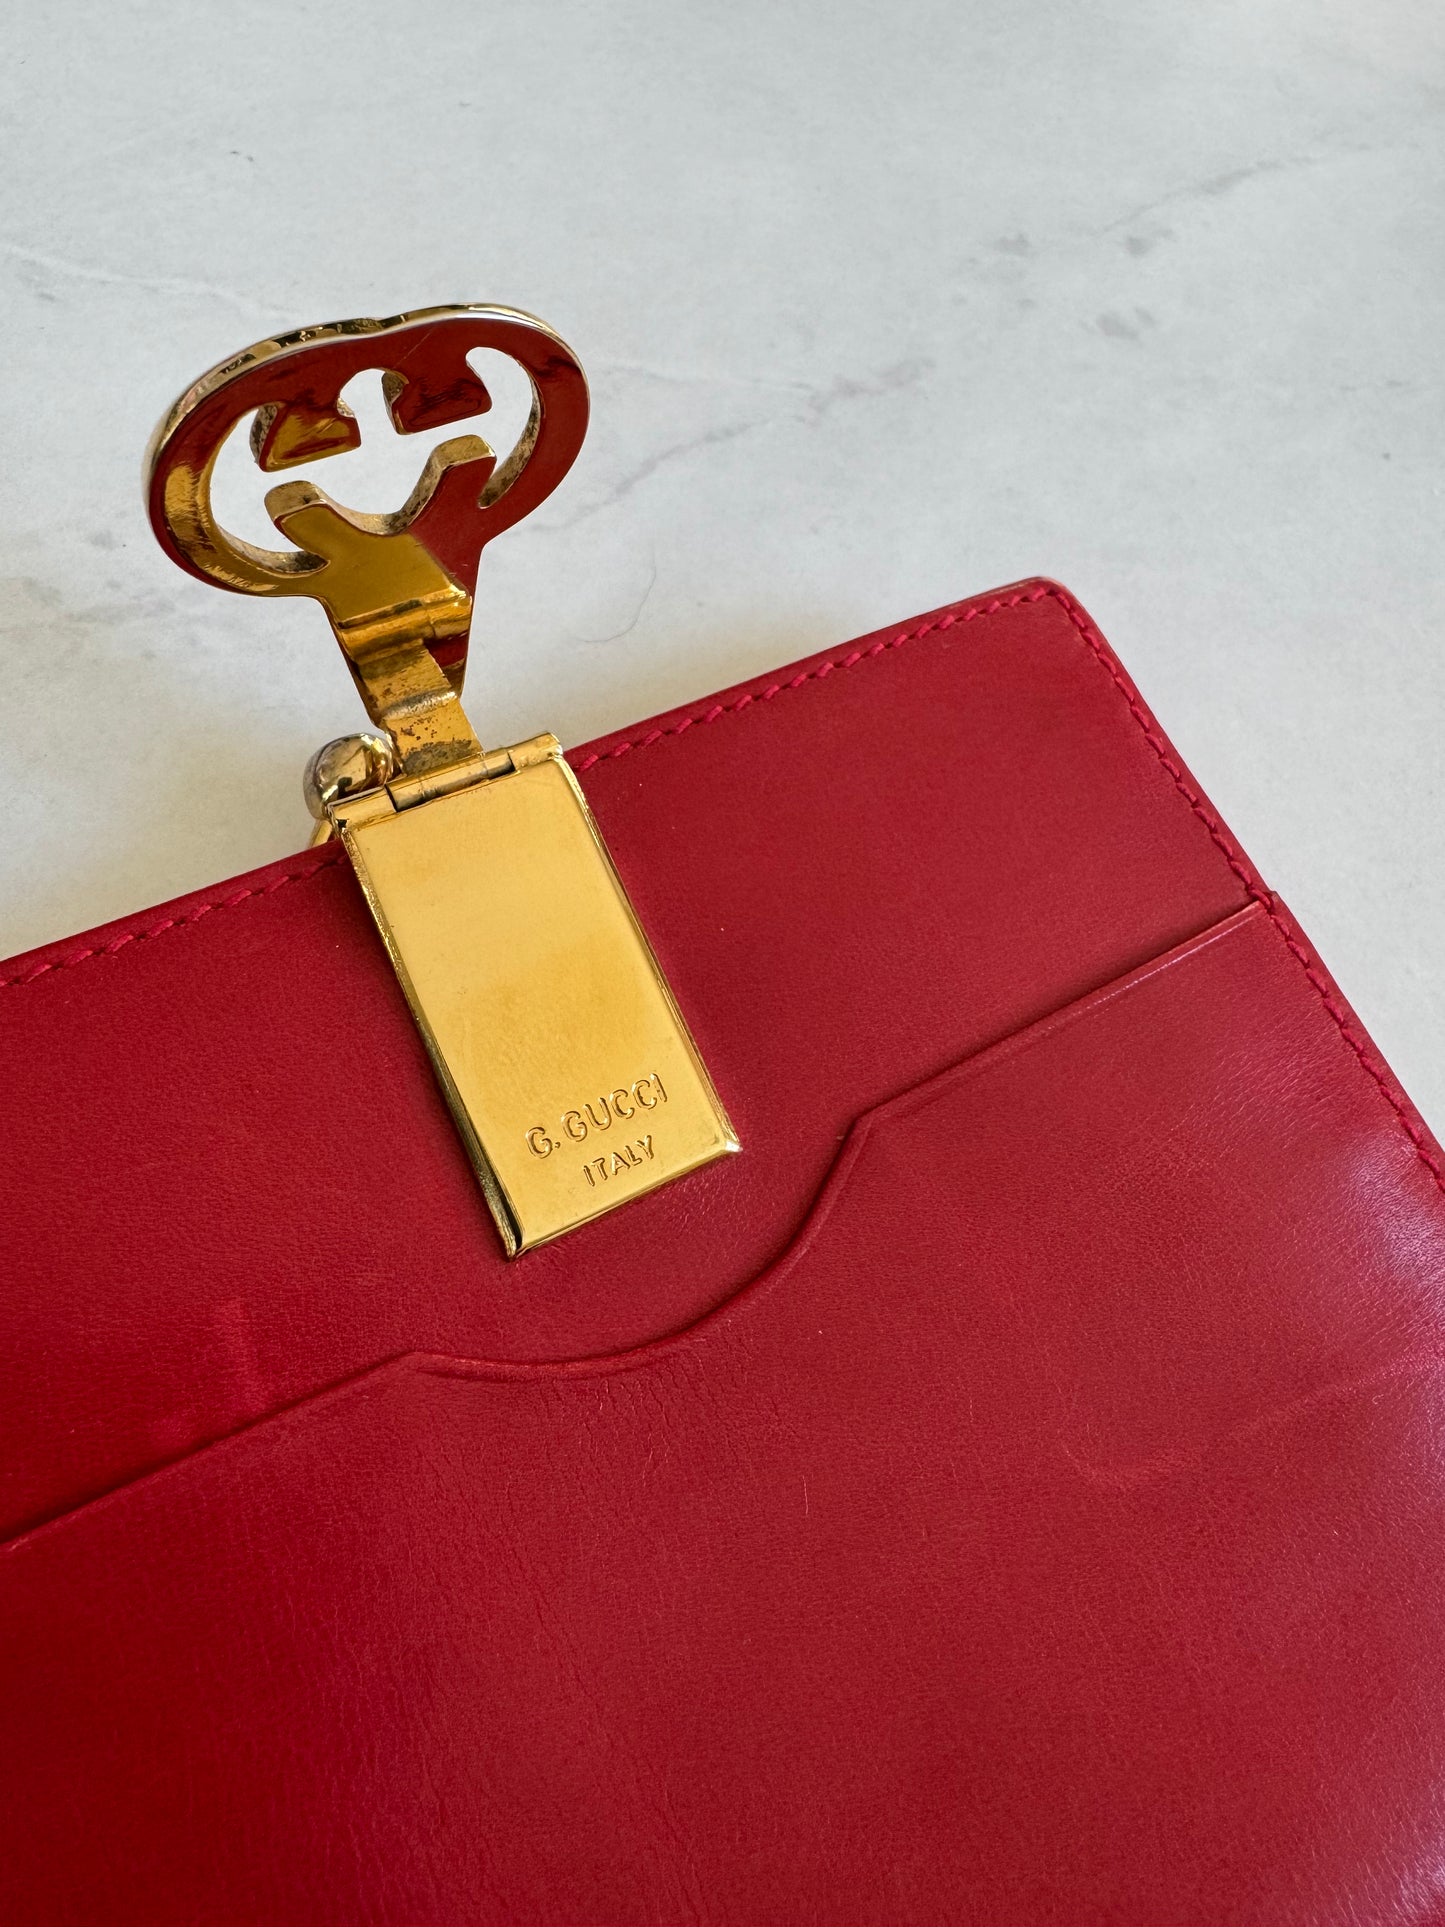 1970s Gucci red wallet with Gold GG clasp